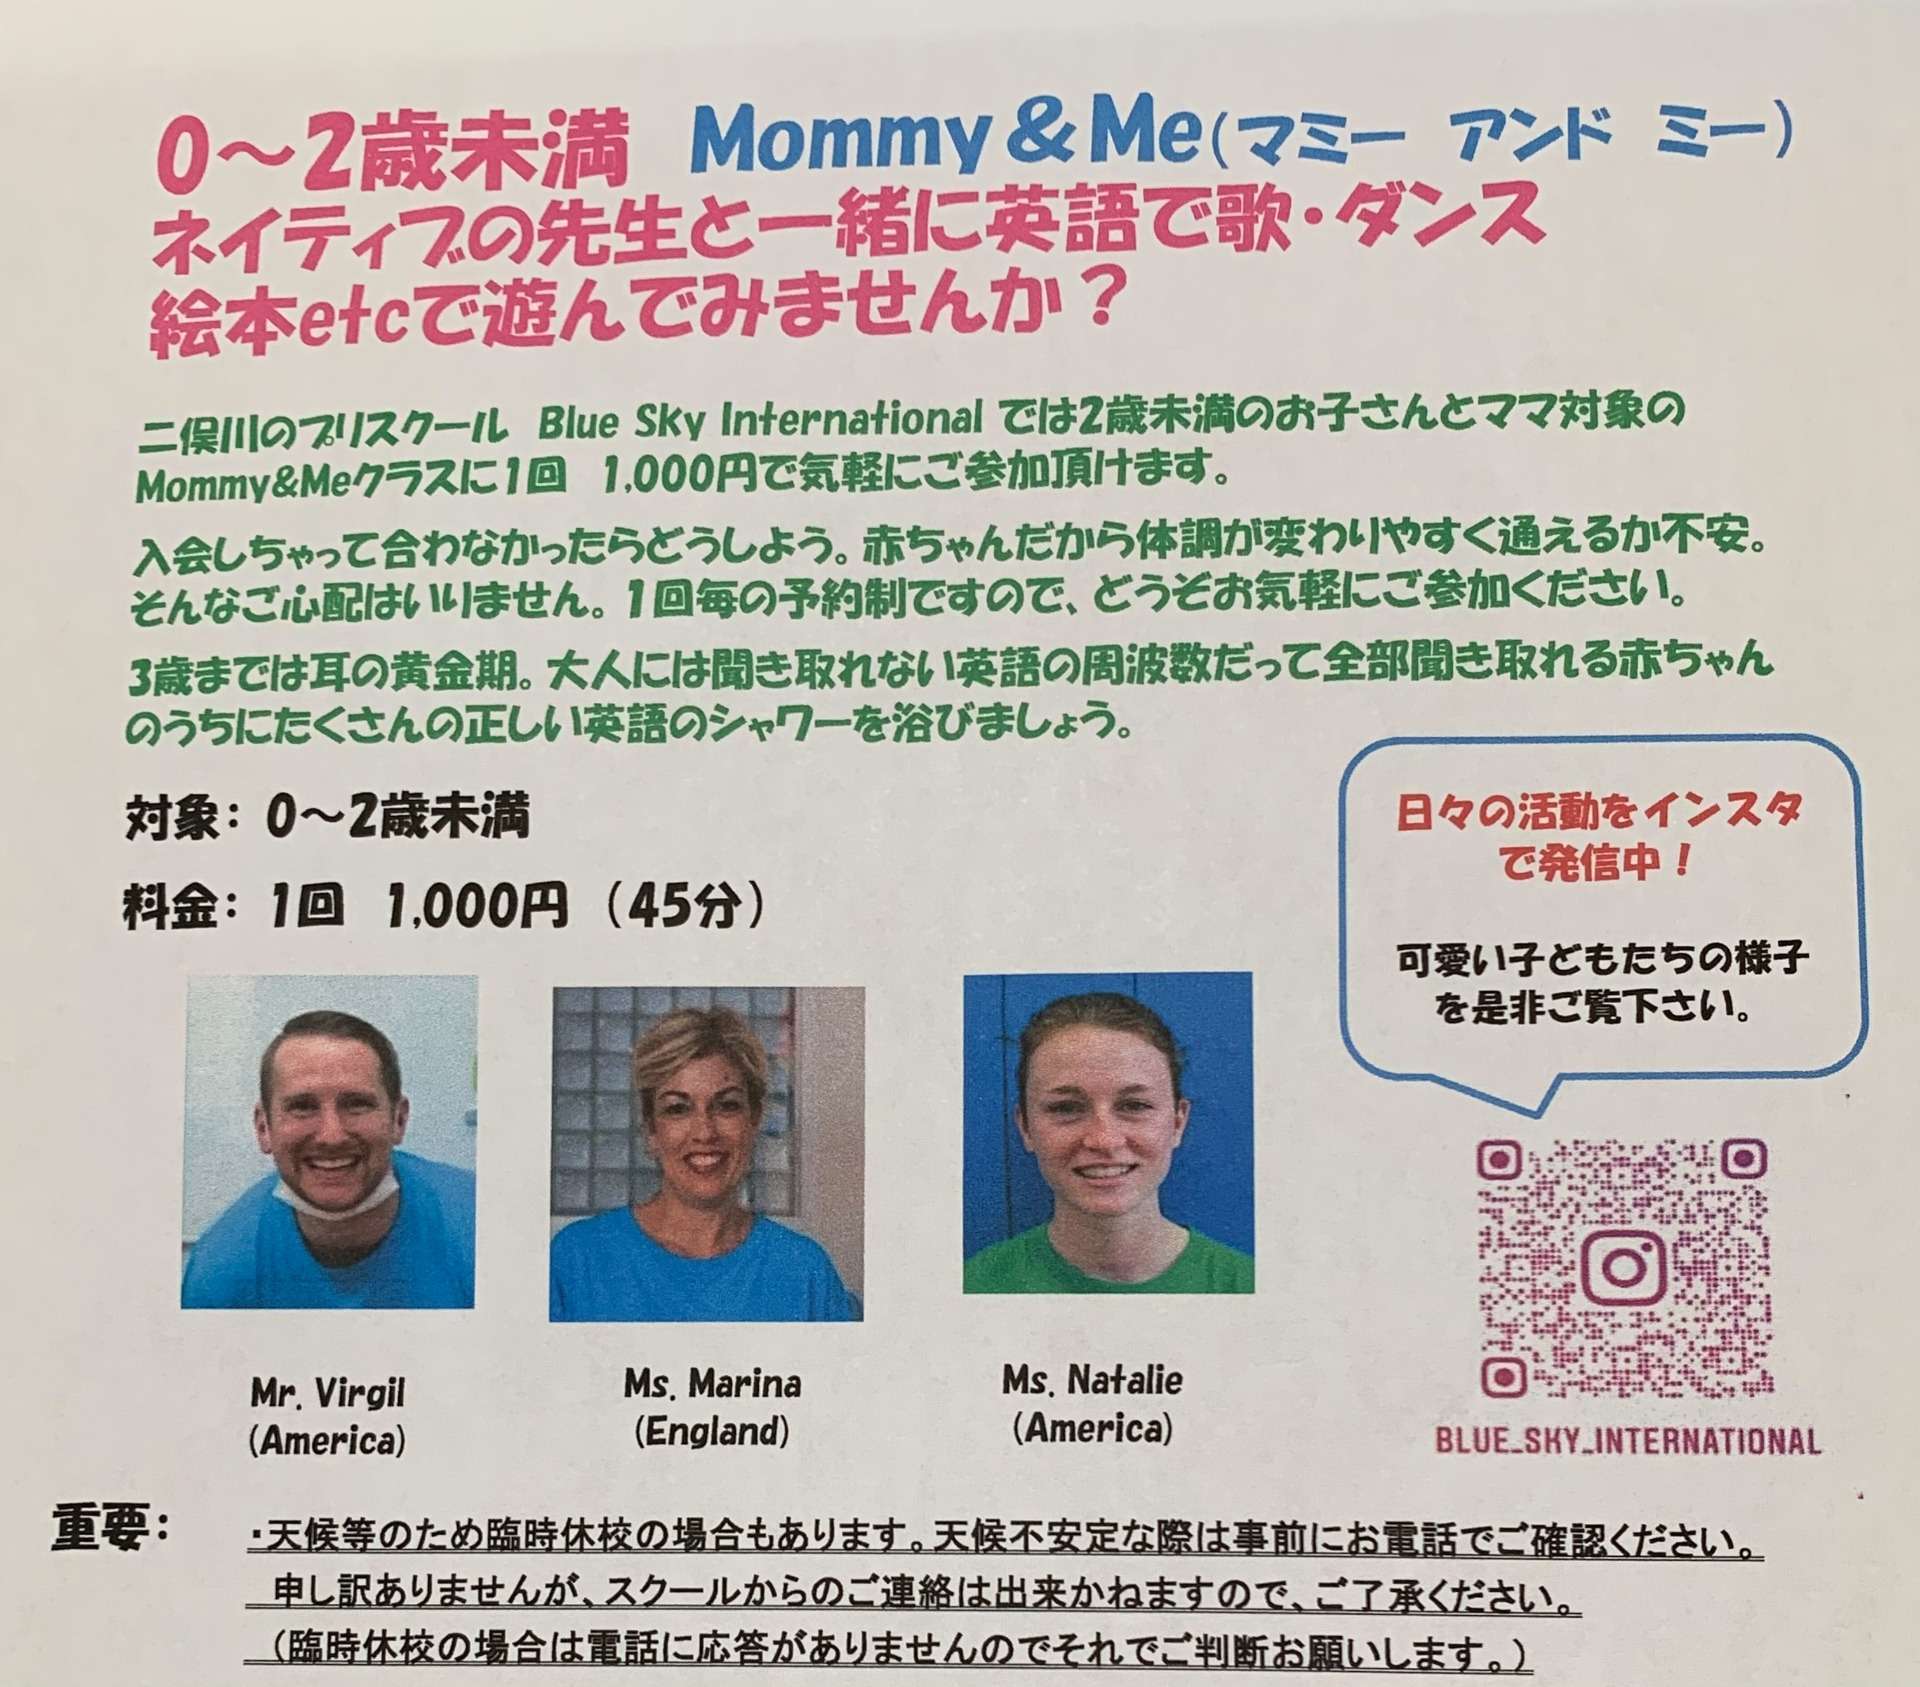 Mommy & Me 9月のご案内